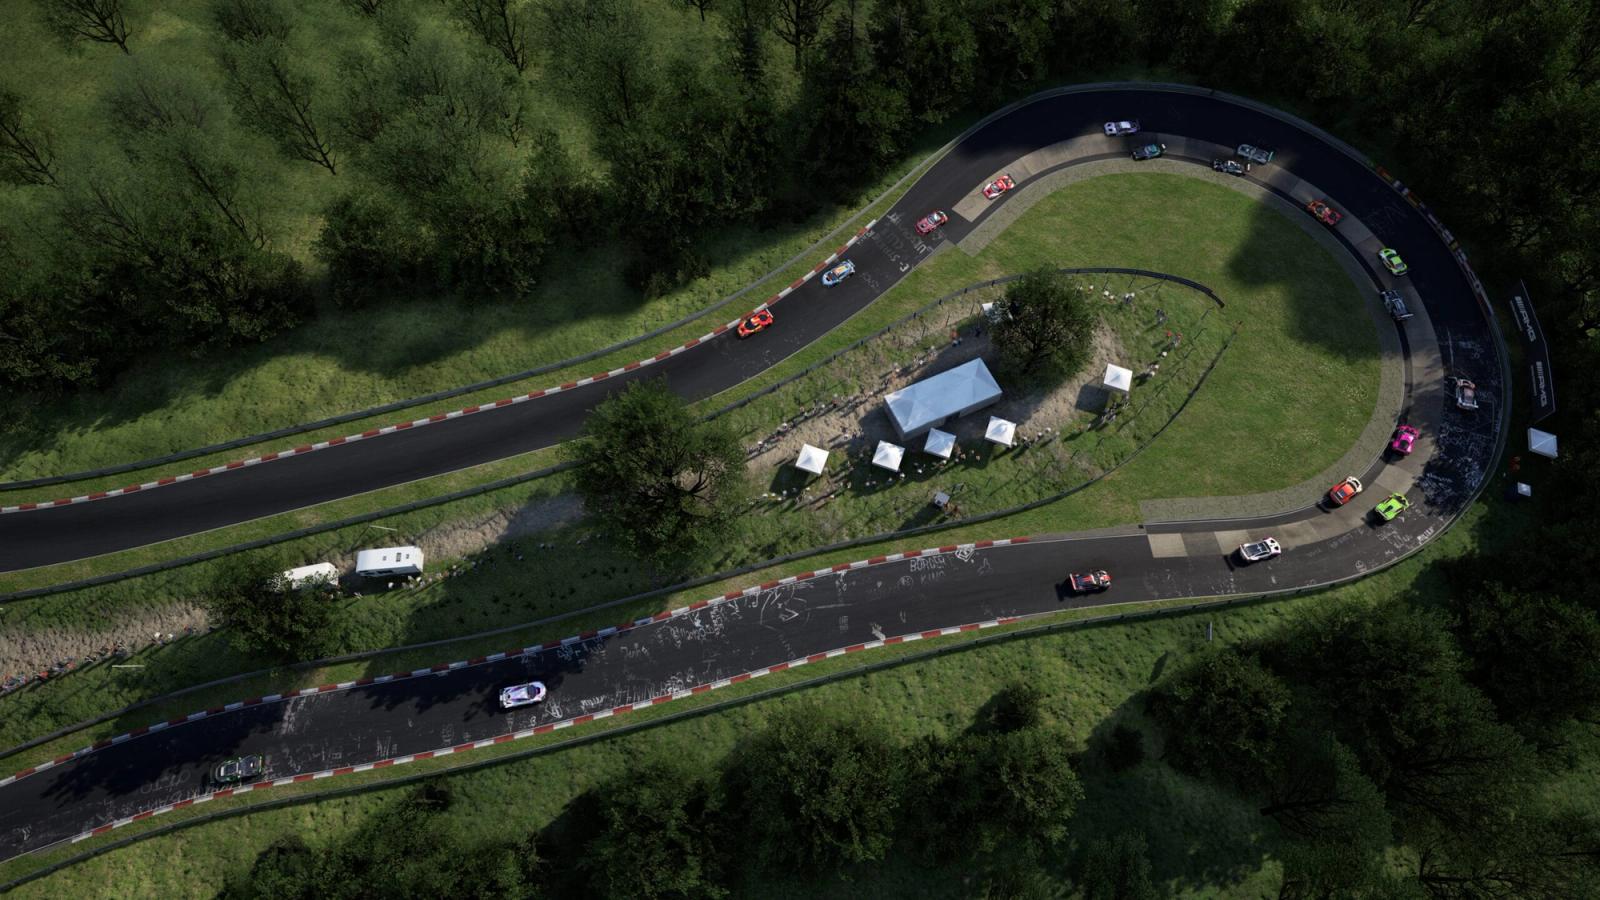 Assetto Corsa Competizone: Nurburgring 24hr Pack DLC available now on console